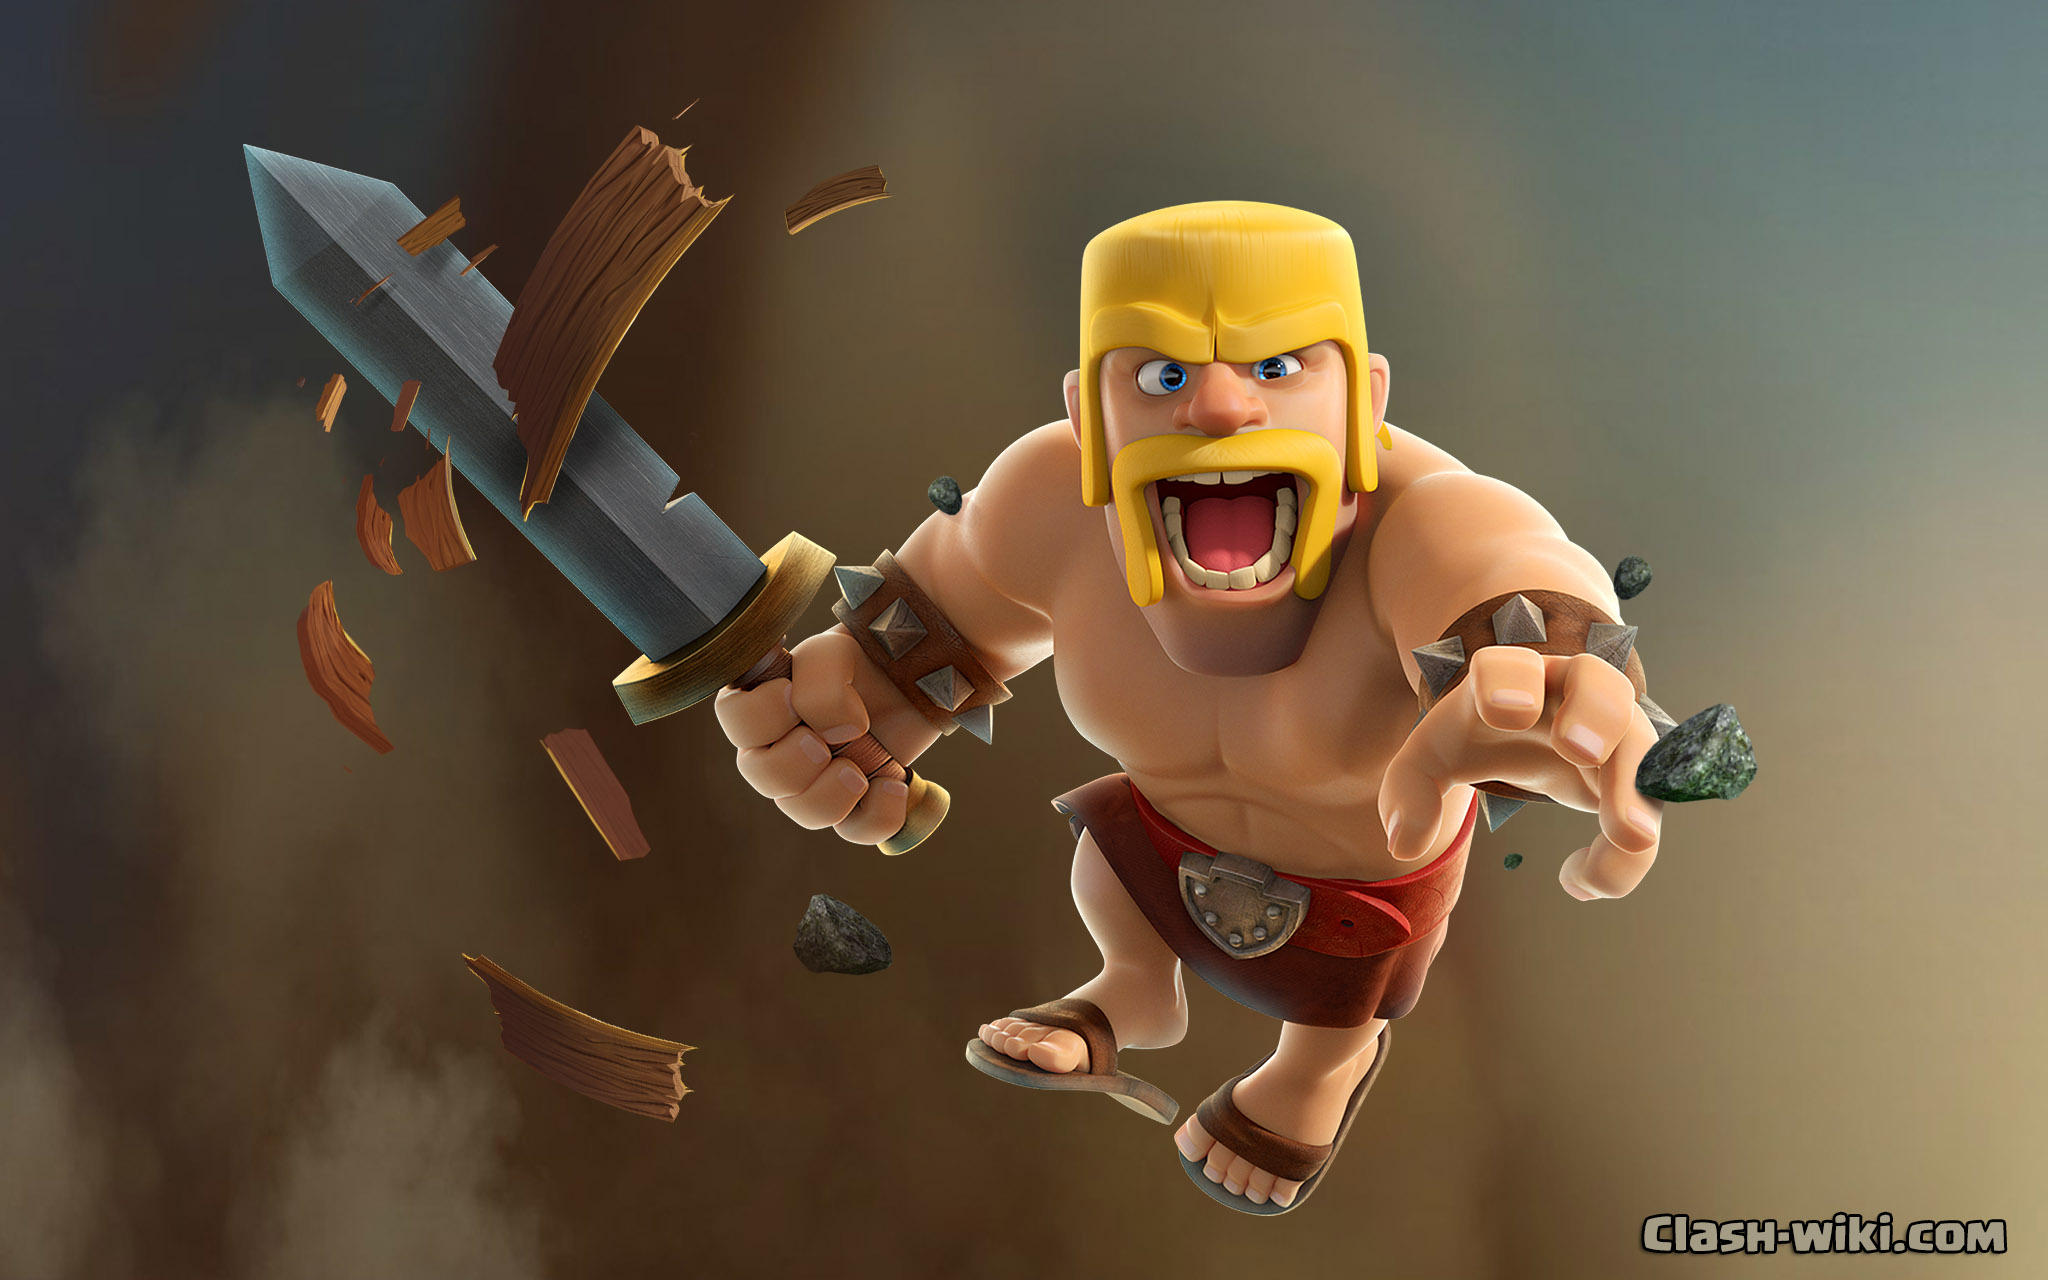 Free download Clash of Clans Wallpapers clash wikicom [2048x1280] for your  Desktop, Mobile & Tablet | Explore 45+ Clash of Clans Barbarian Wallpaper |  Barbarian Wallpaper, Conan The Barbarian Wallpapers, Conan The Barbarian  Wallpaper